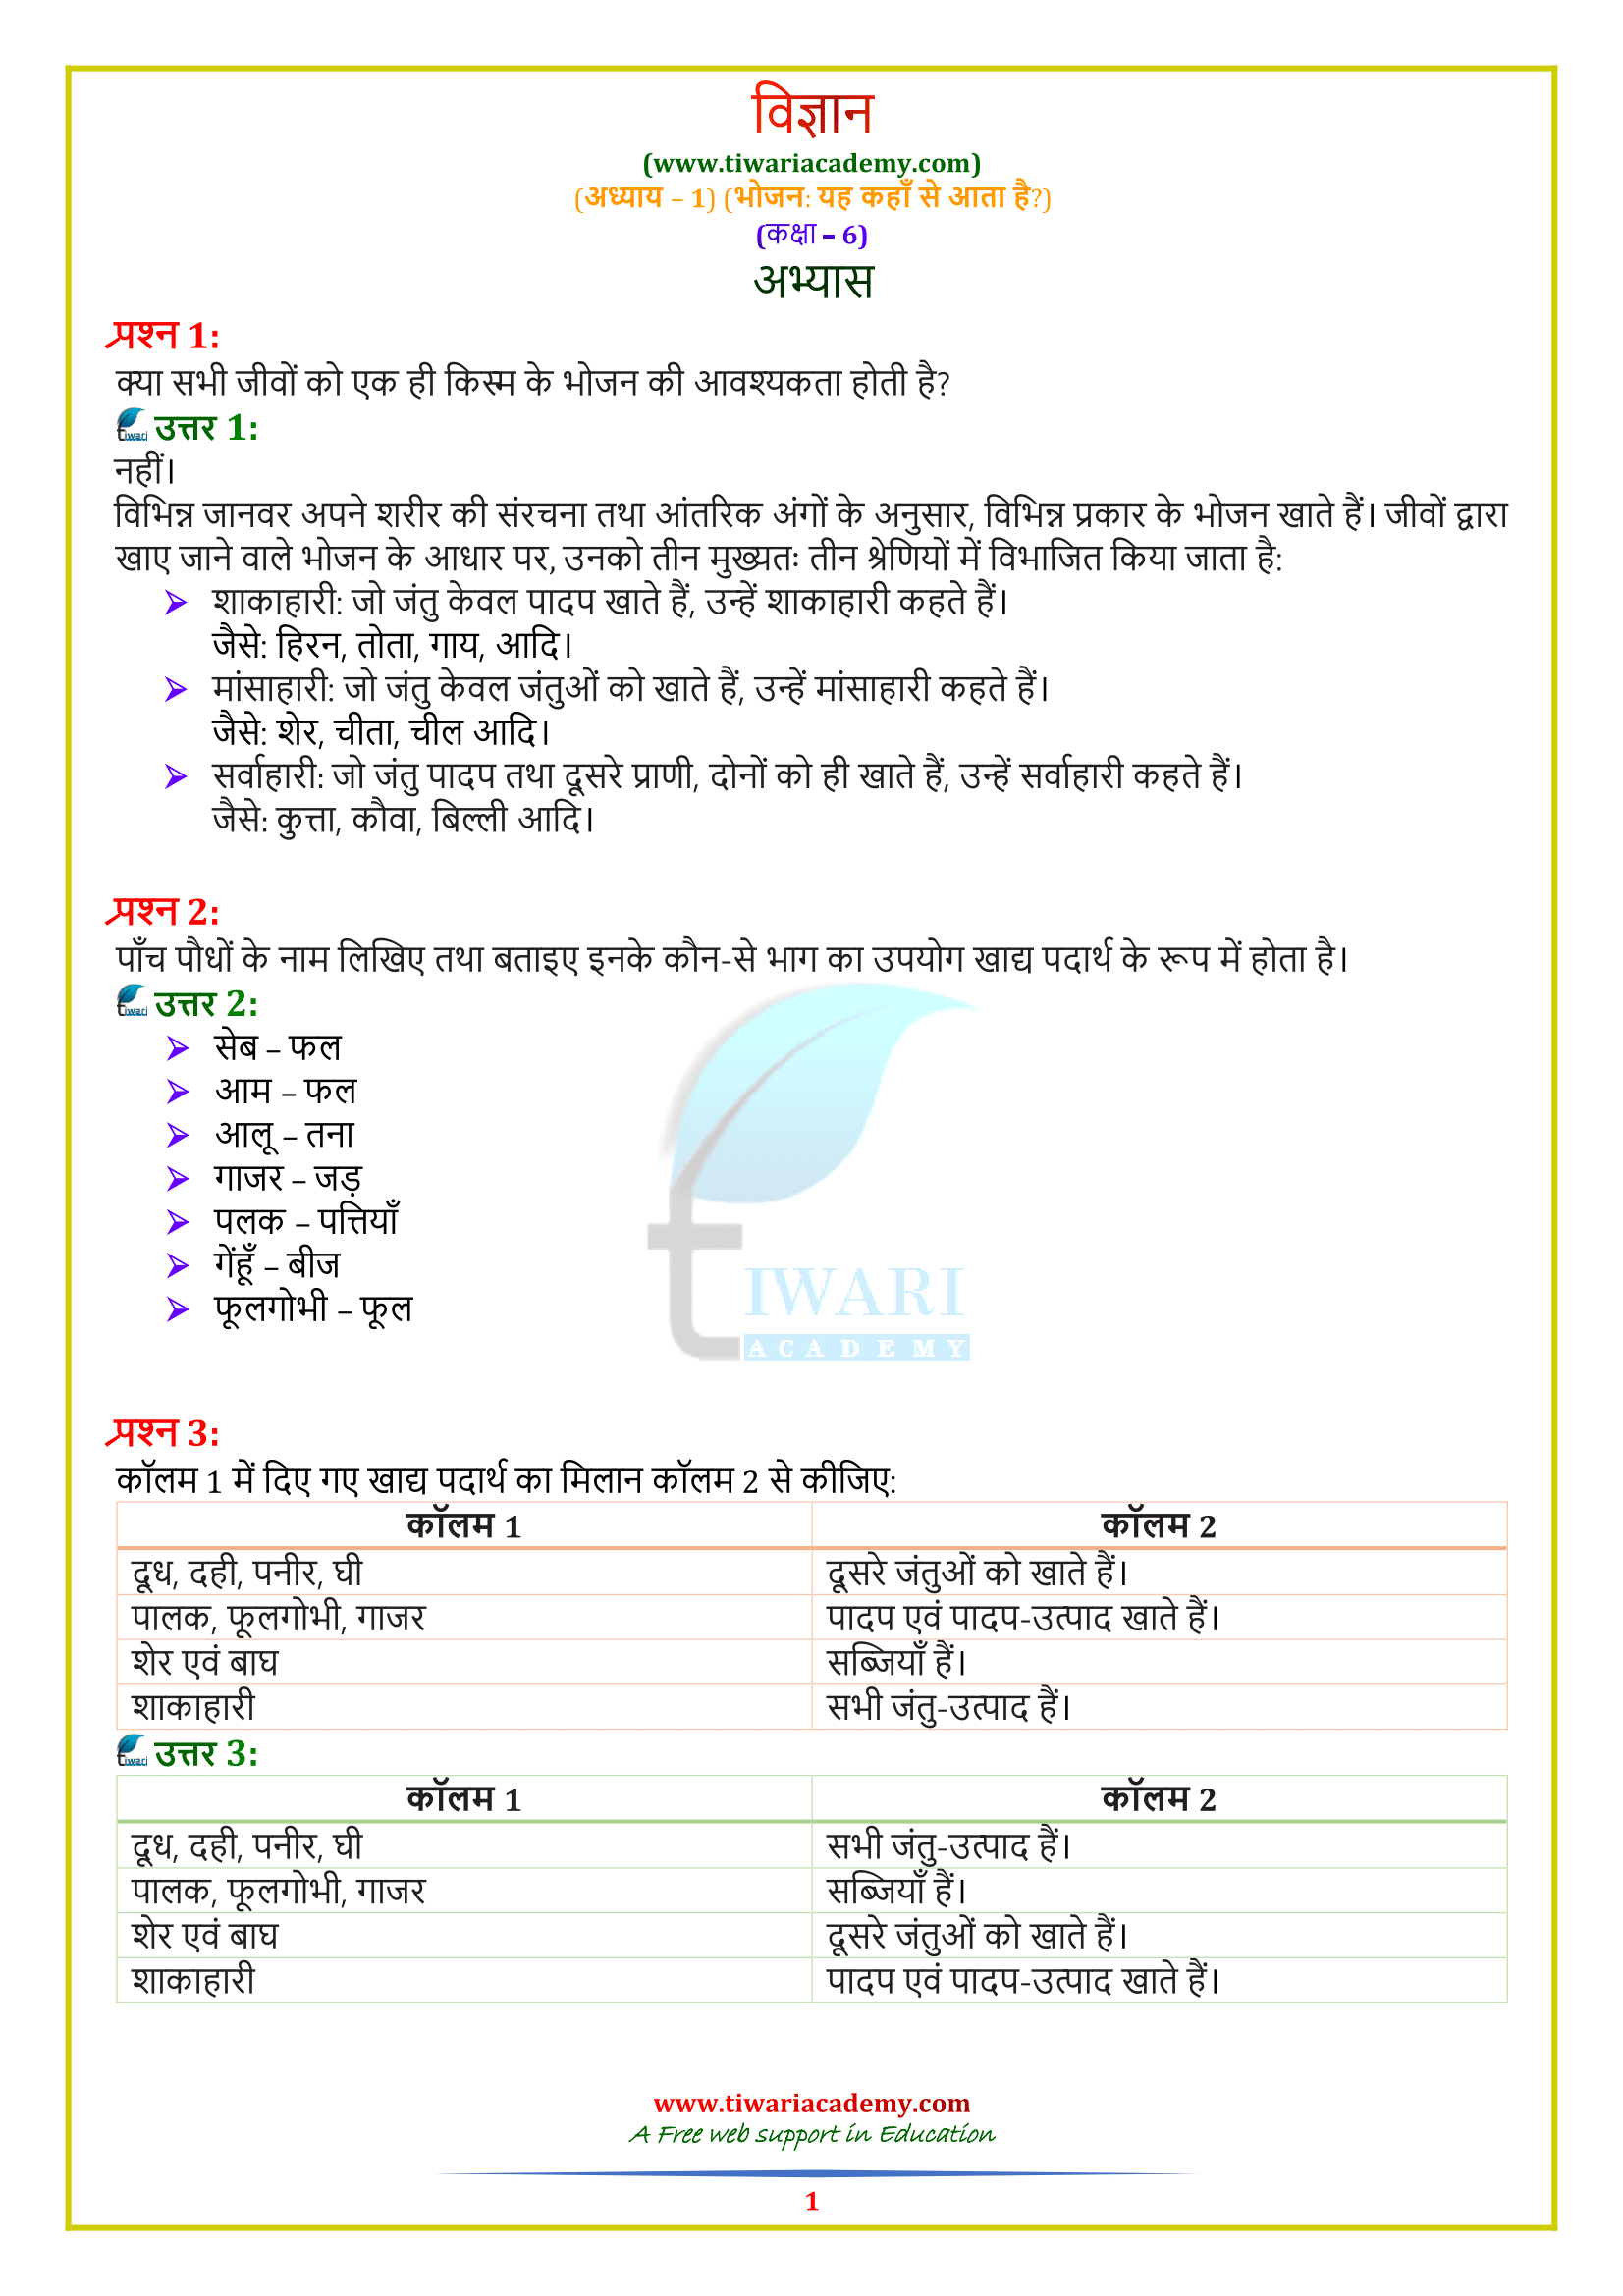 NCERT Solutions for Class 6 Science Chapter 1 in Hindi Medium